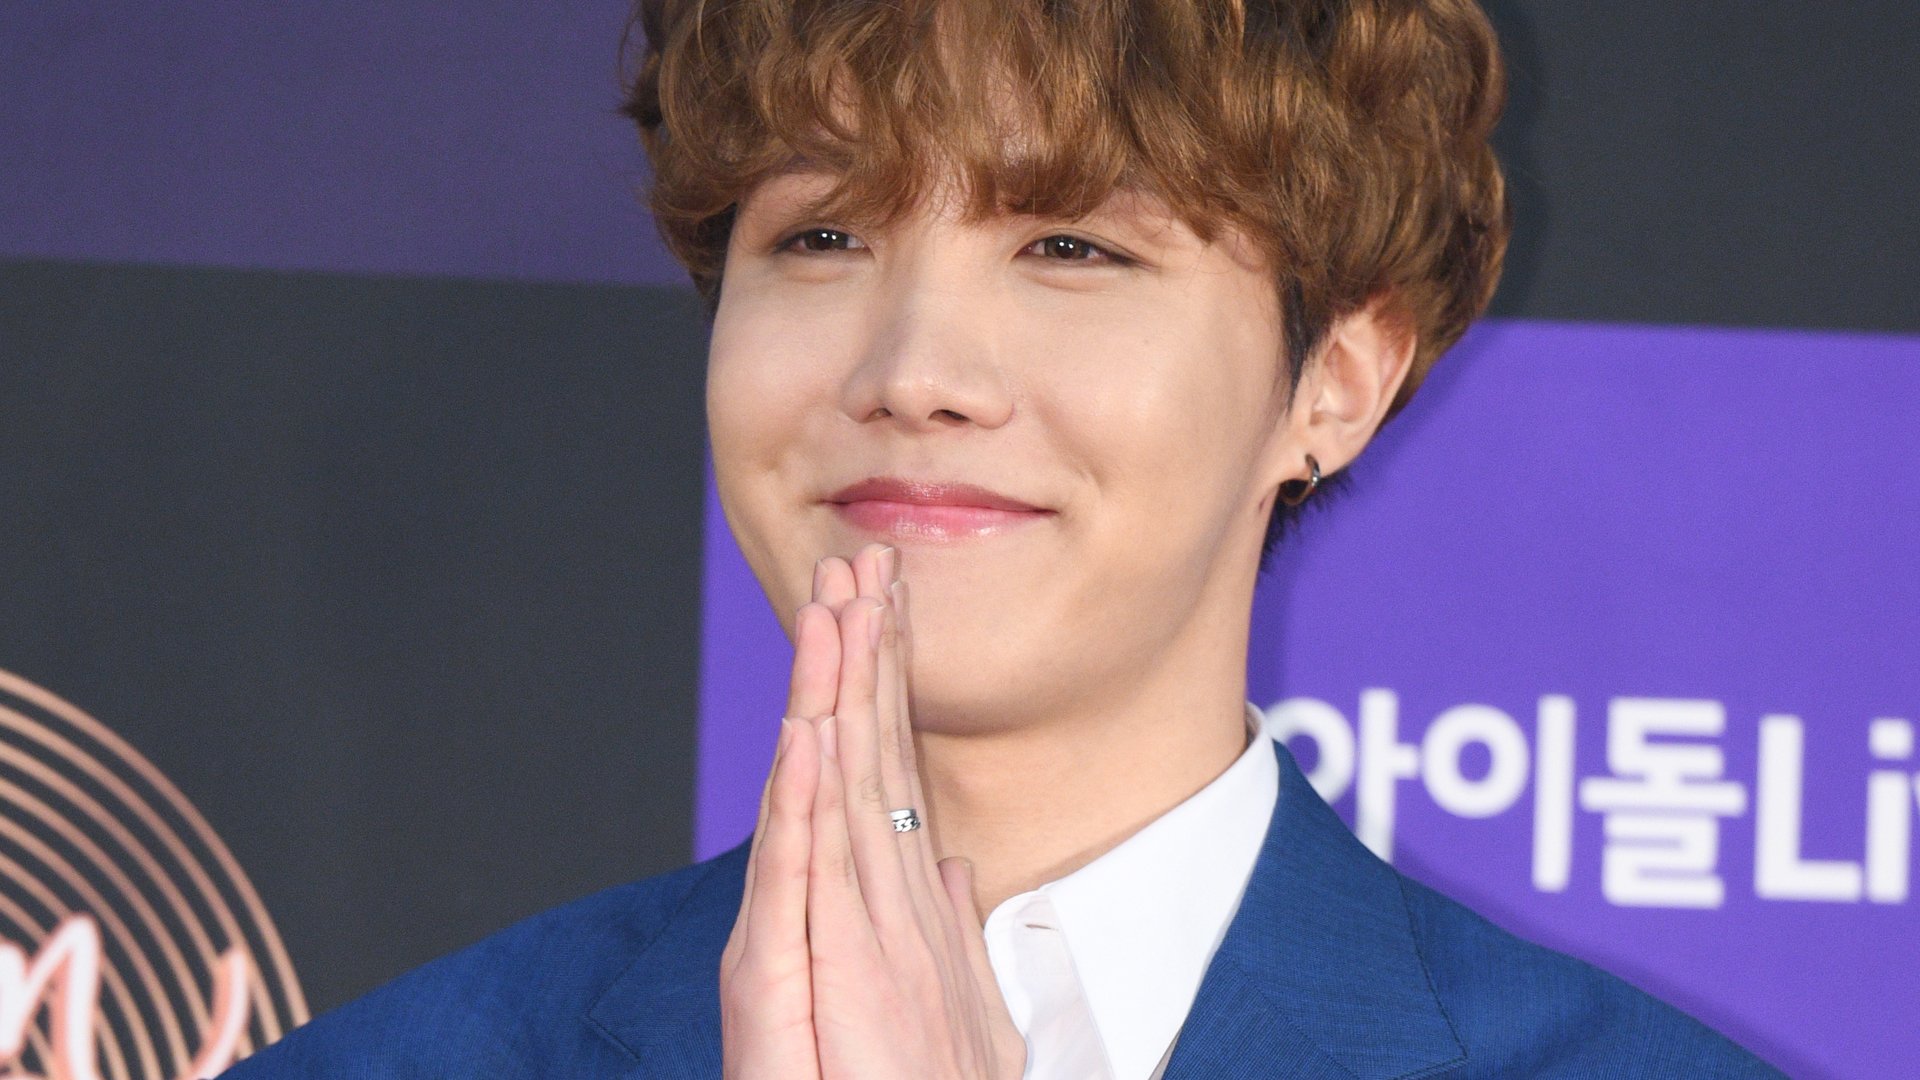 J-Hope of Bangtan Boys (BTS) arrives at the photocall for the 34th Golden Disc Awards on January 05, 2020 in Seoul, South Korea.